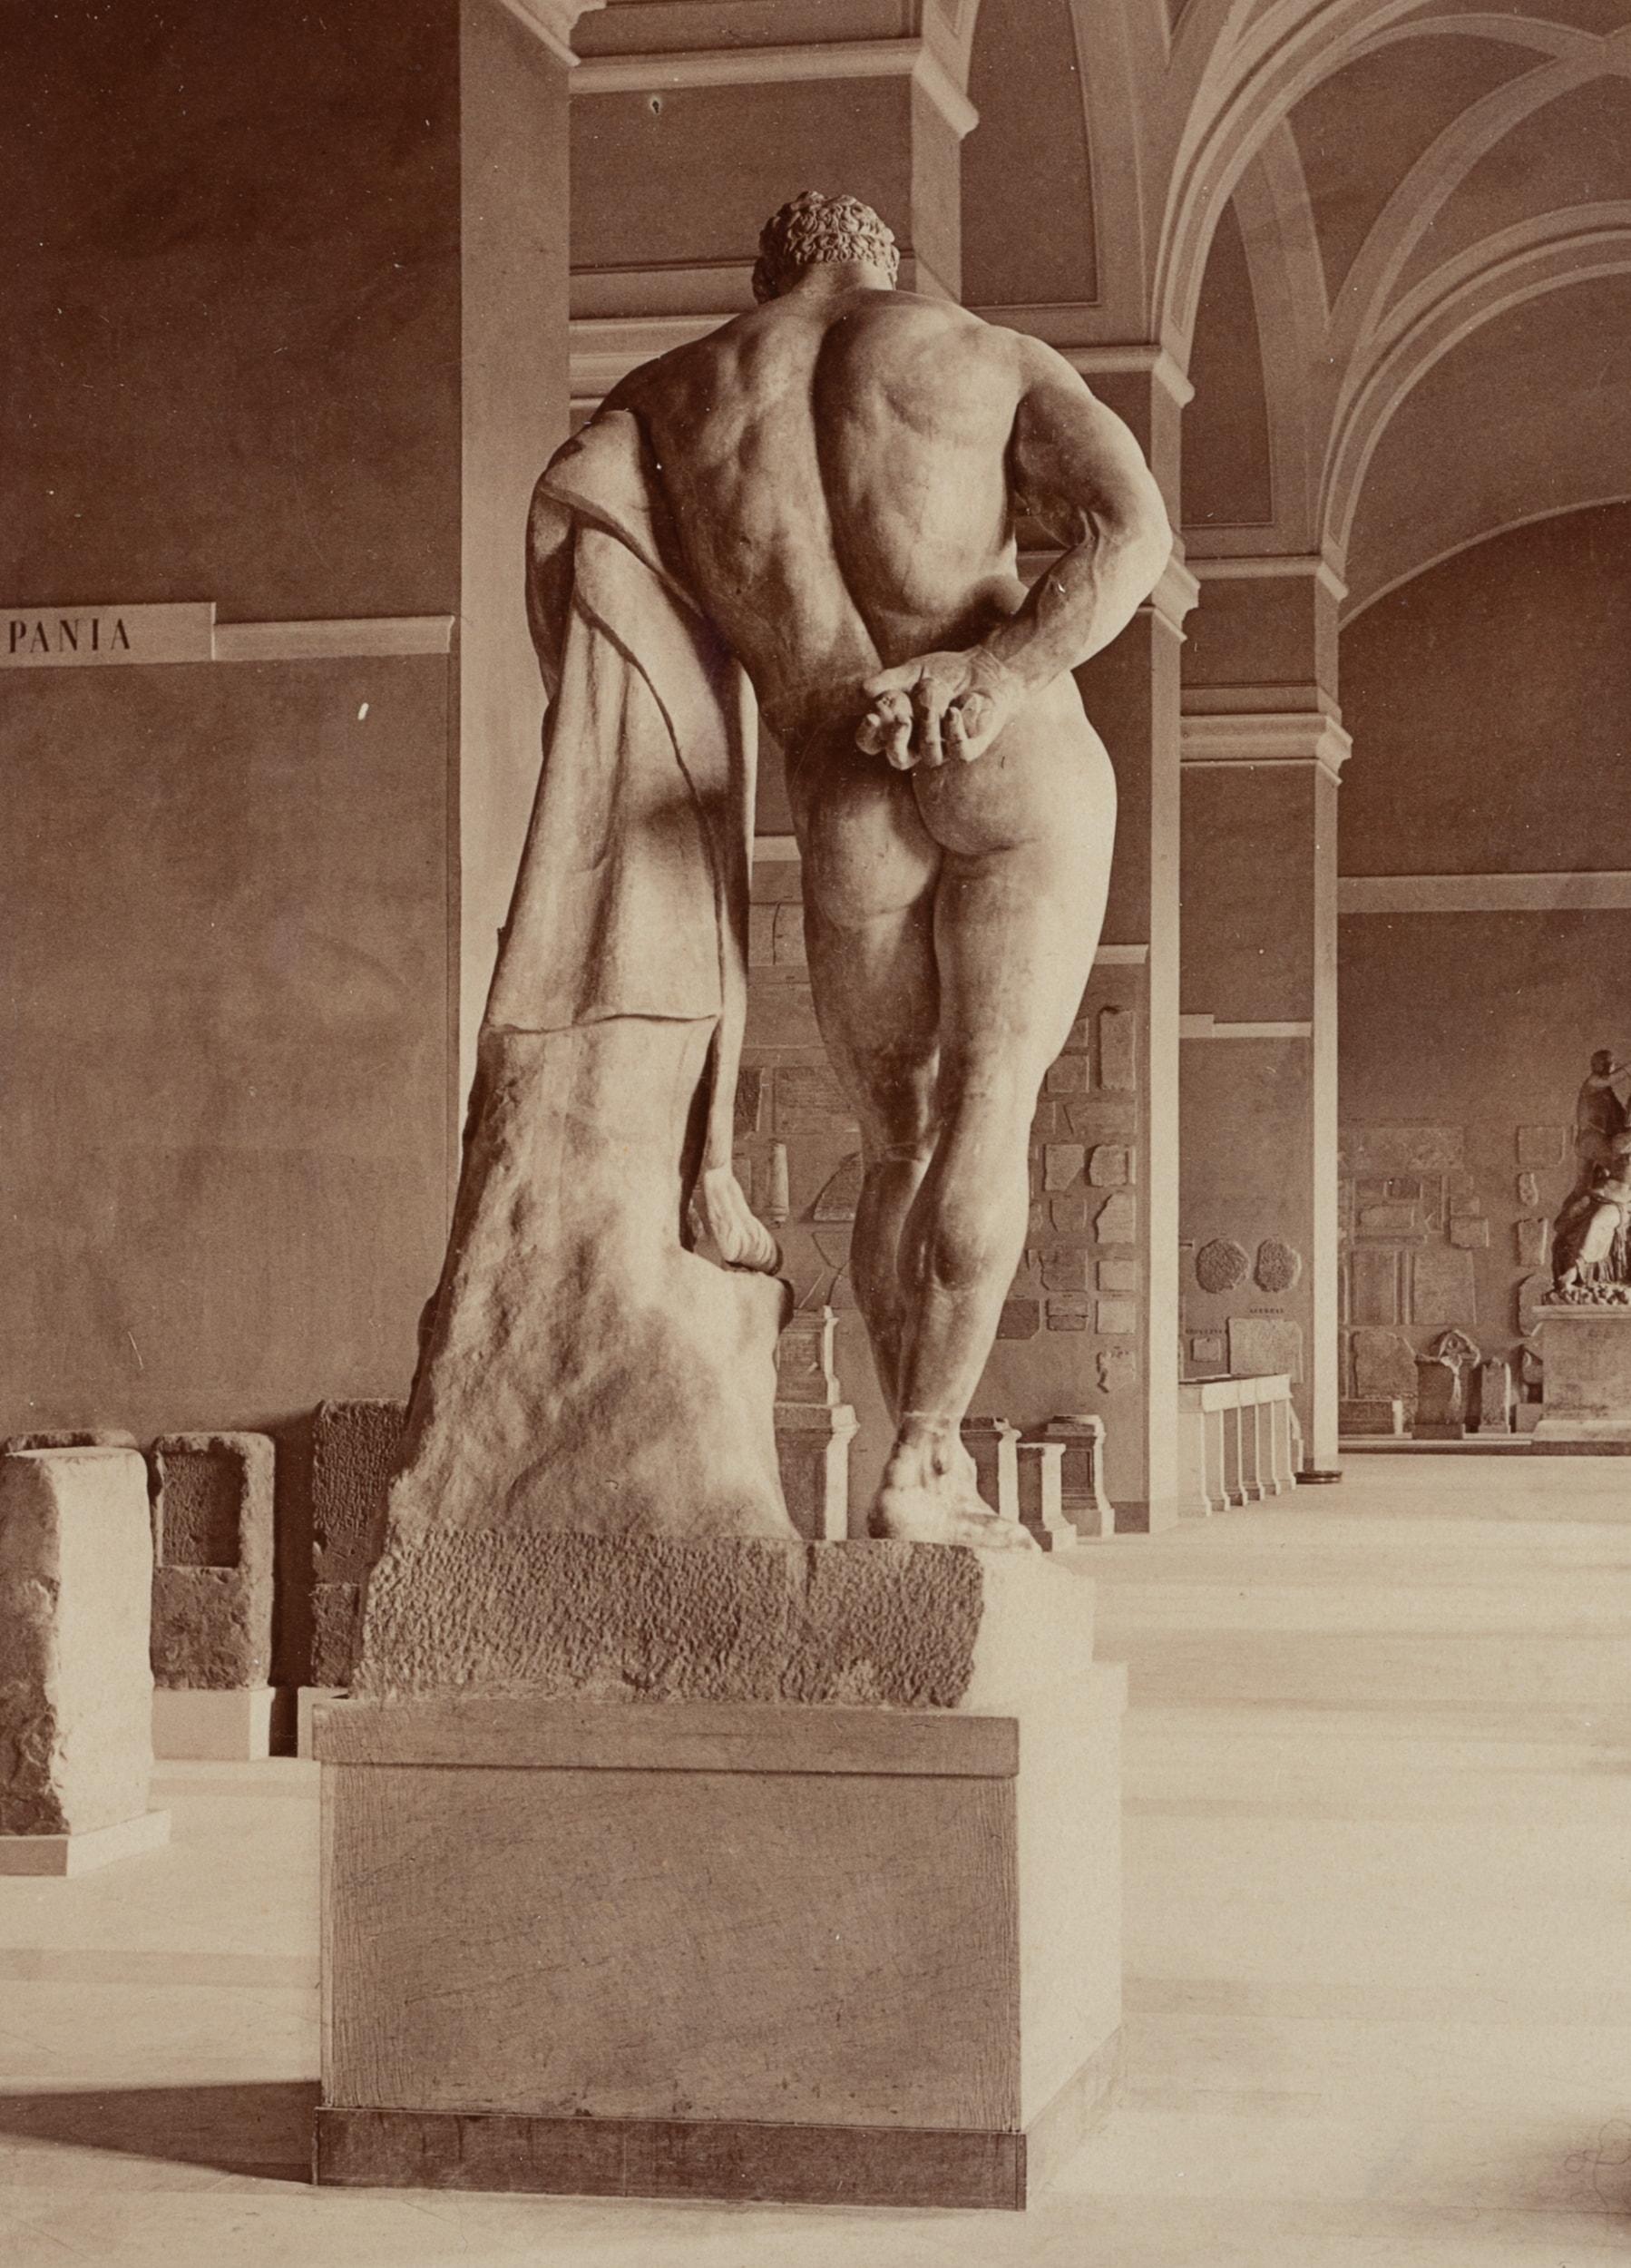 Fratelli Alinari (19th century): View of the back figure of Hercules Farnese in the large hall in the National Archaeological Museum, Museo Nazionale, Naples, c. 1880, albumen paper print

Technique: albumen paper print

Inscription: Lower middle